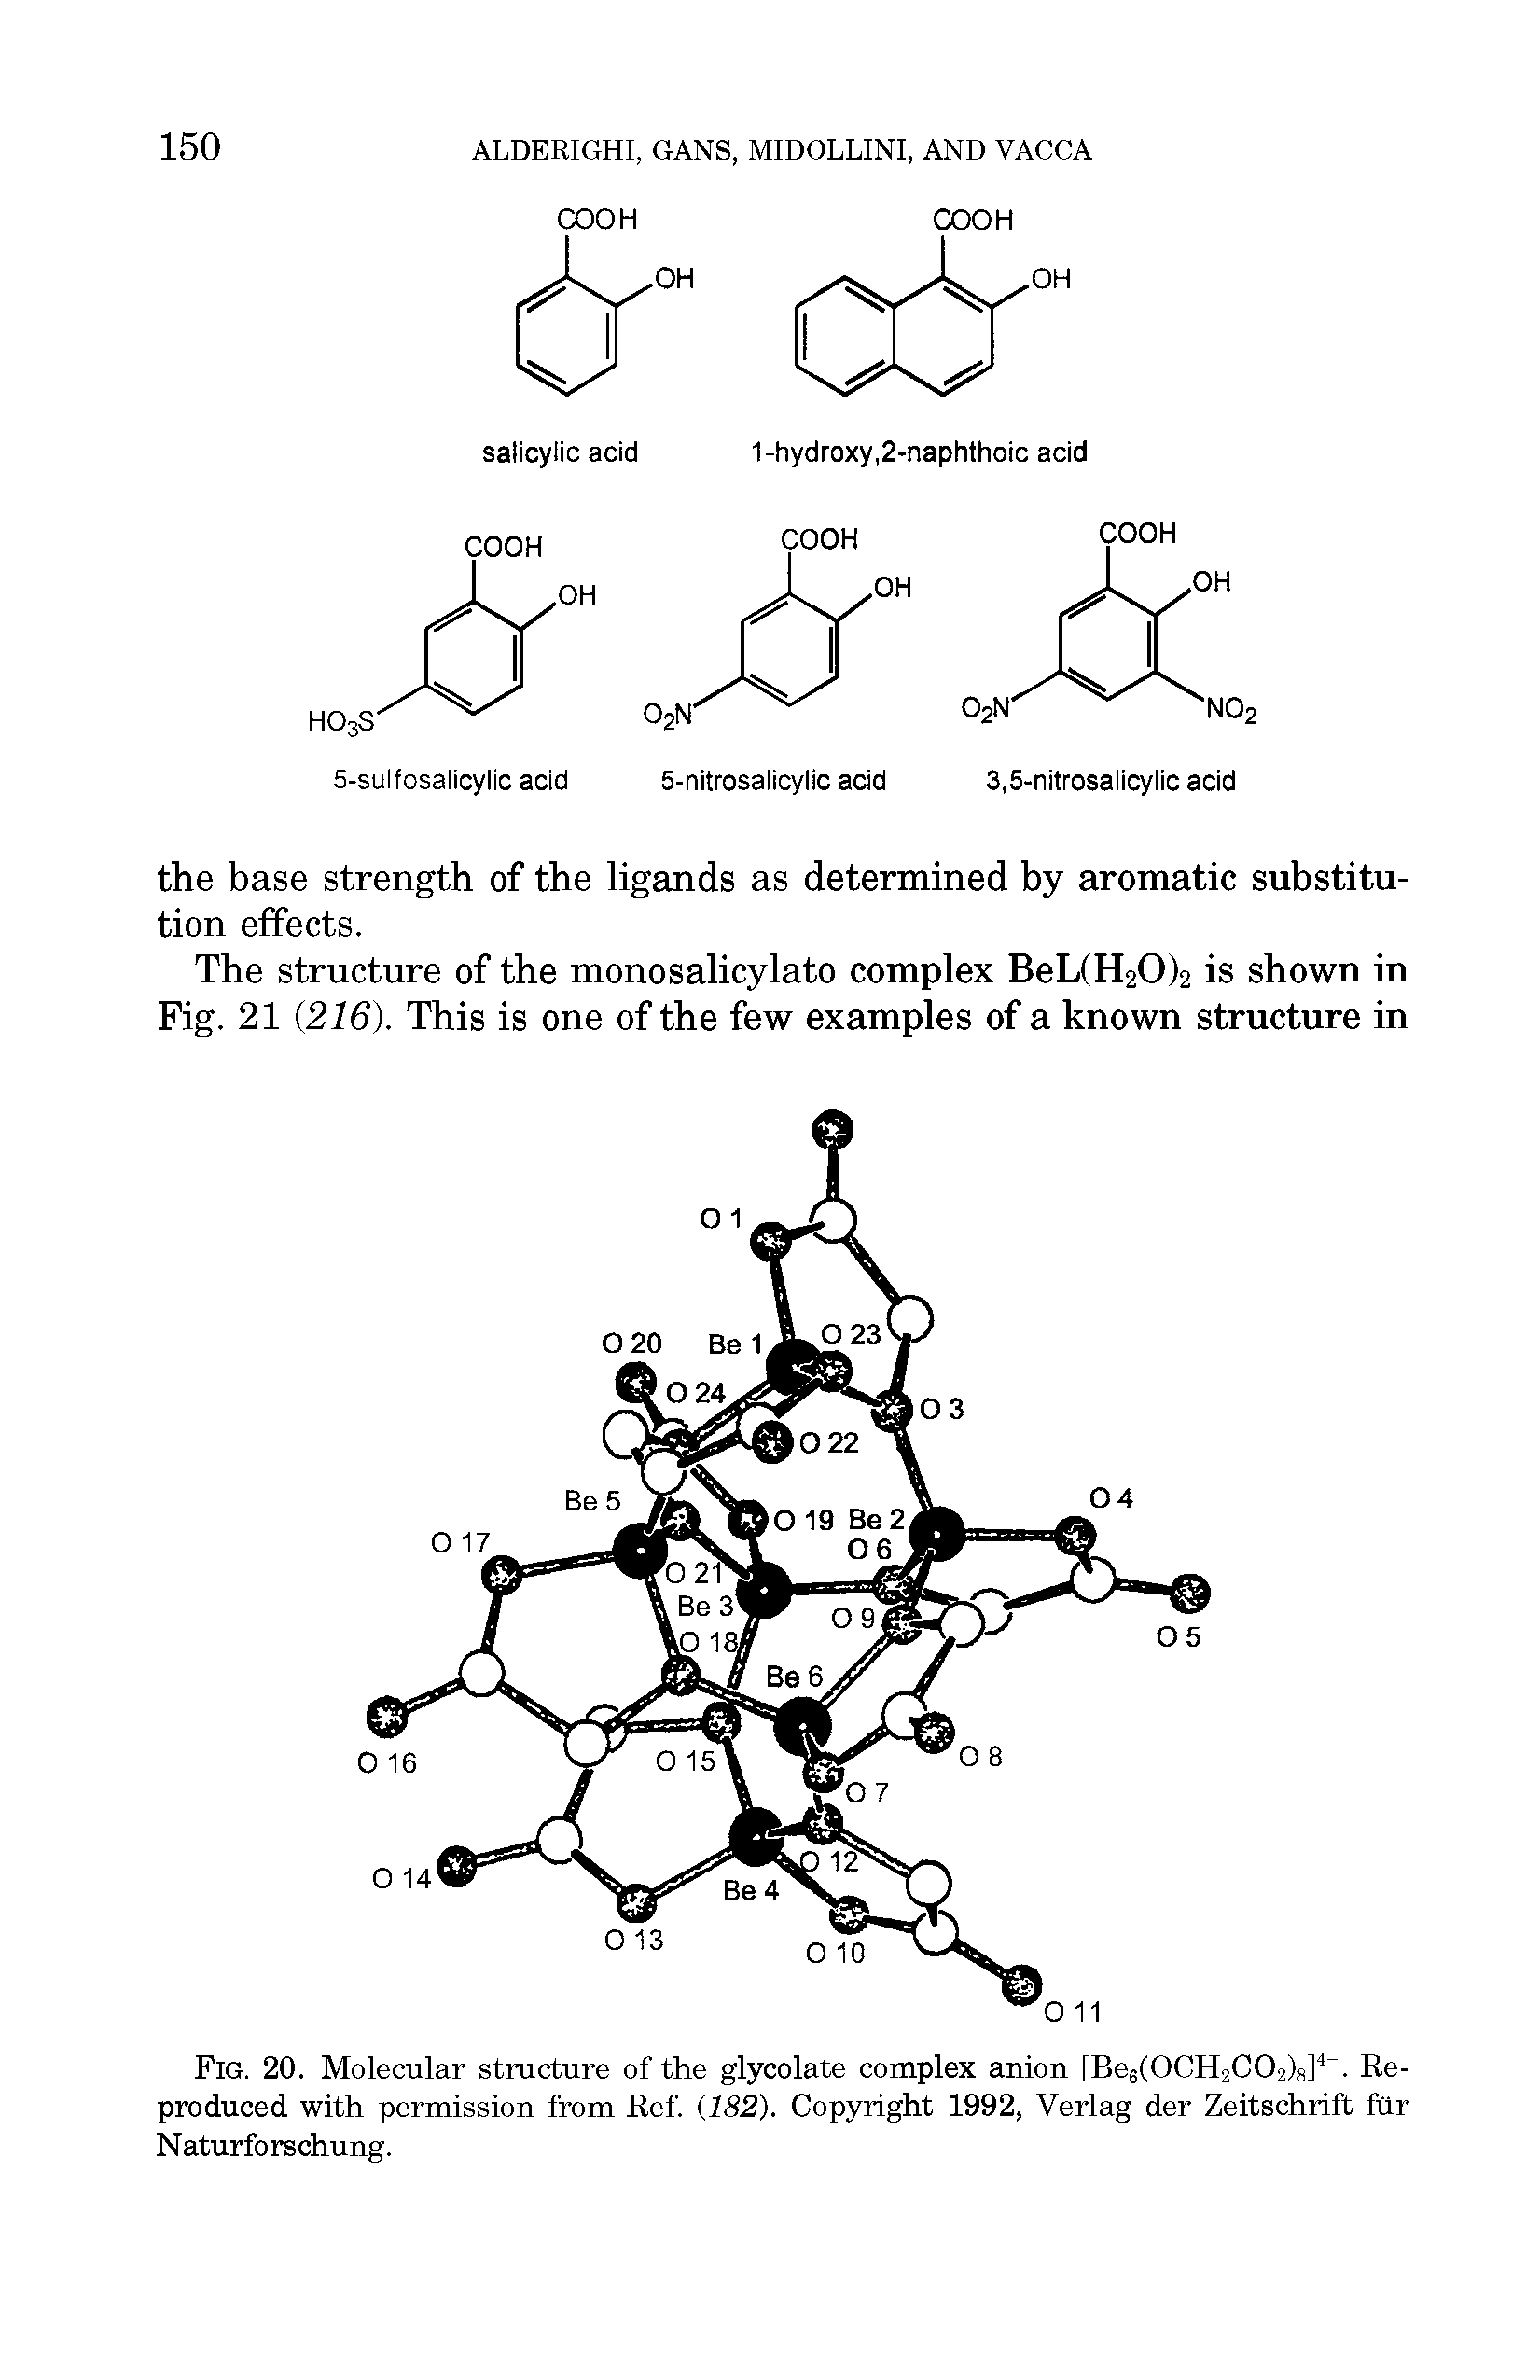 Fig. 20. Molecular structure of the glycolate complex anion [Be6(0CH2C02)8]4. Reproduced with permission from Ref. (182). Copyright 1992, Verlag der Zeitschrift fur Naturfors chung.